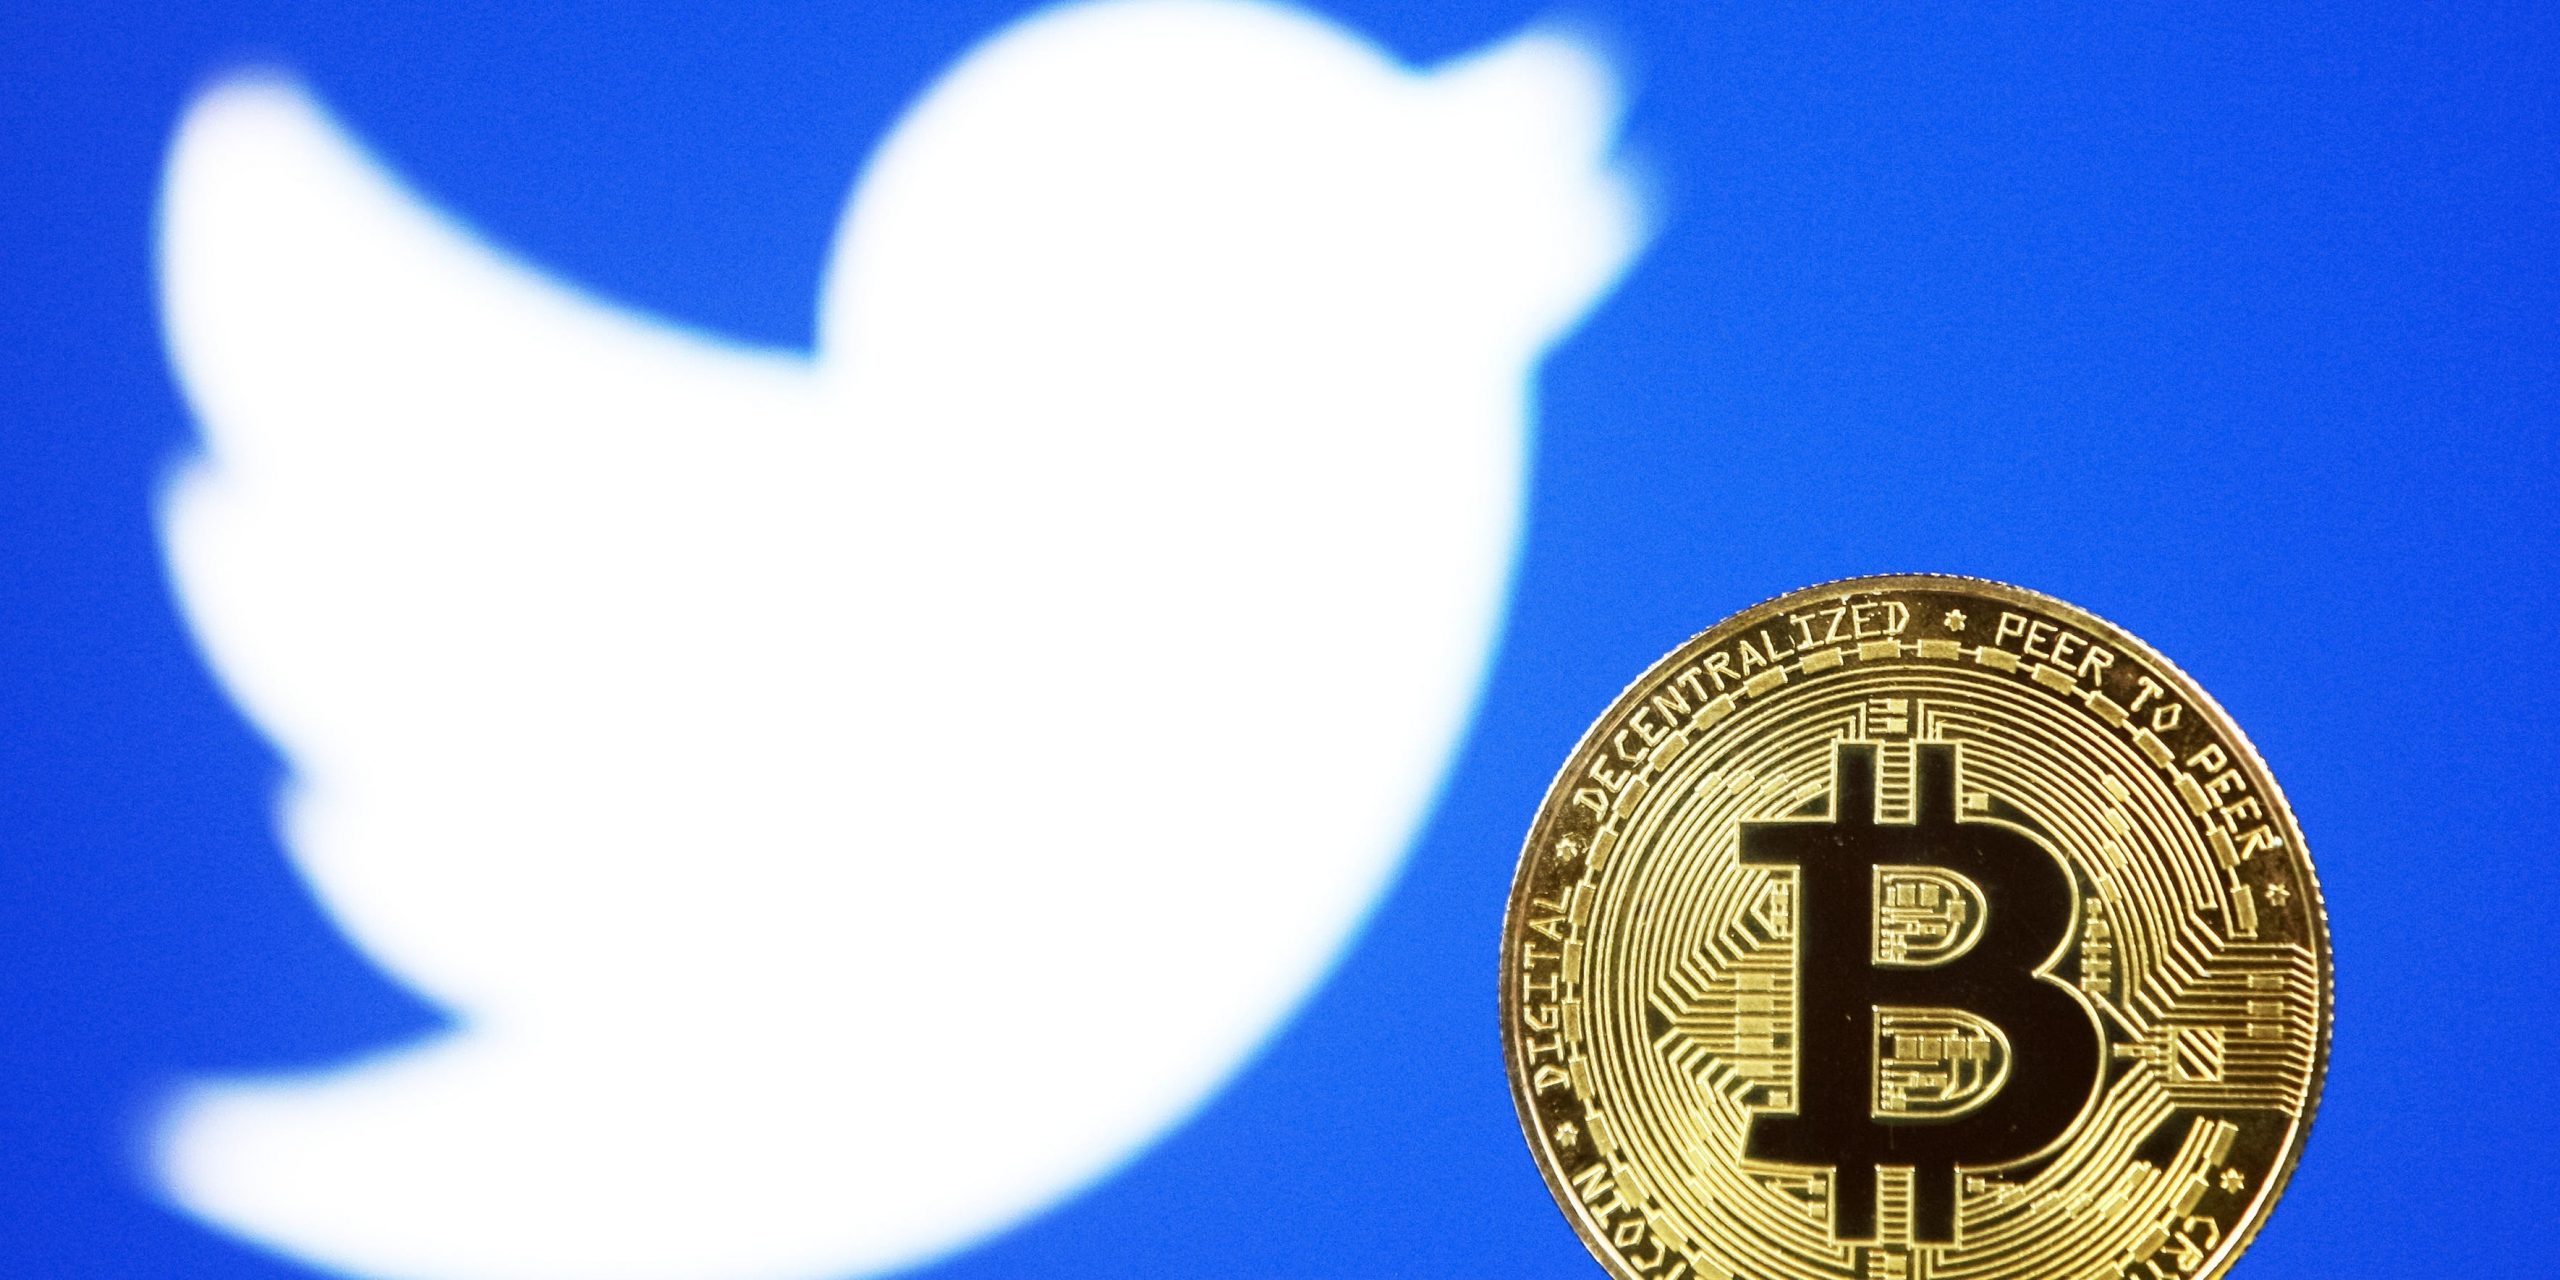 Bitcoin and twitter